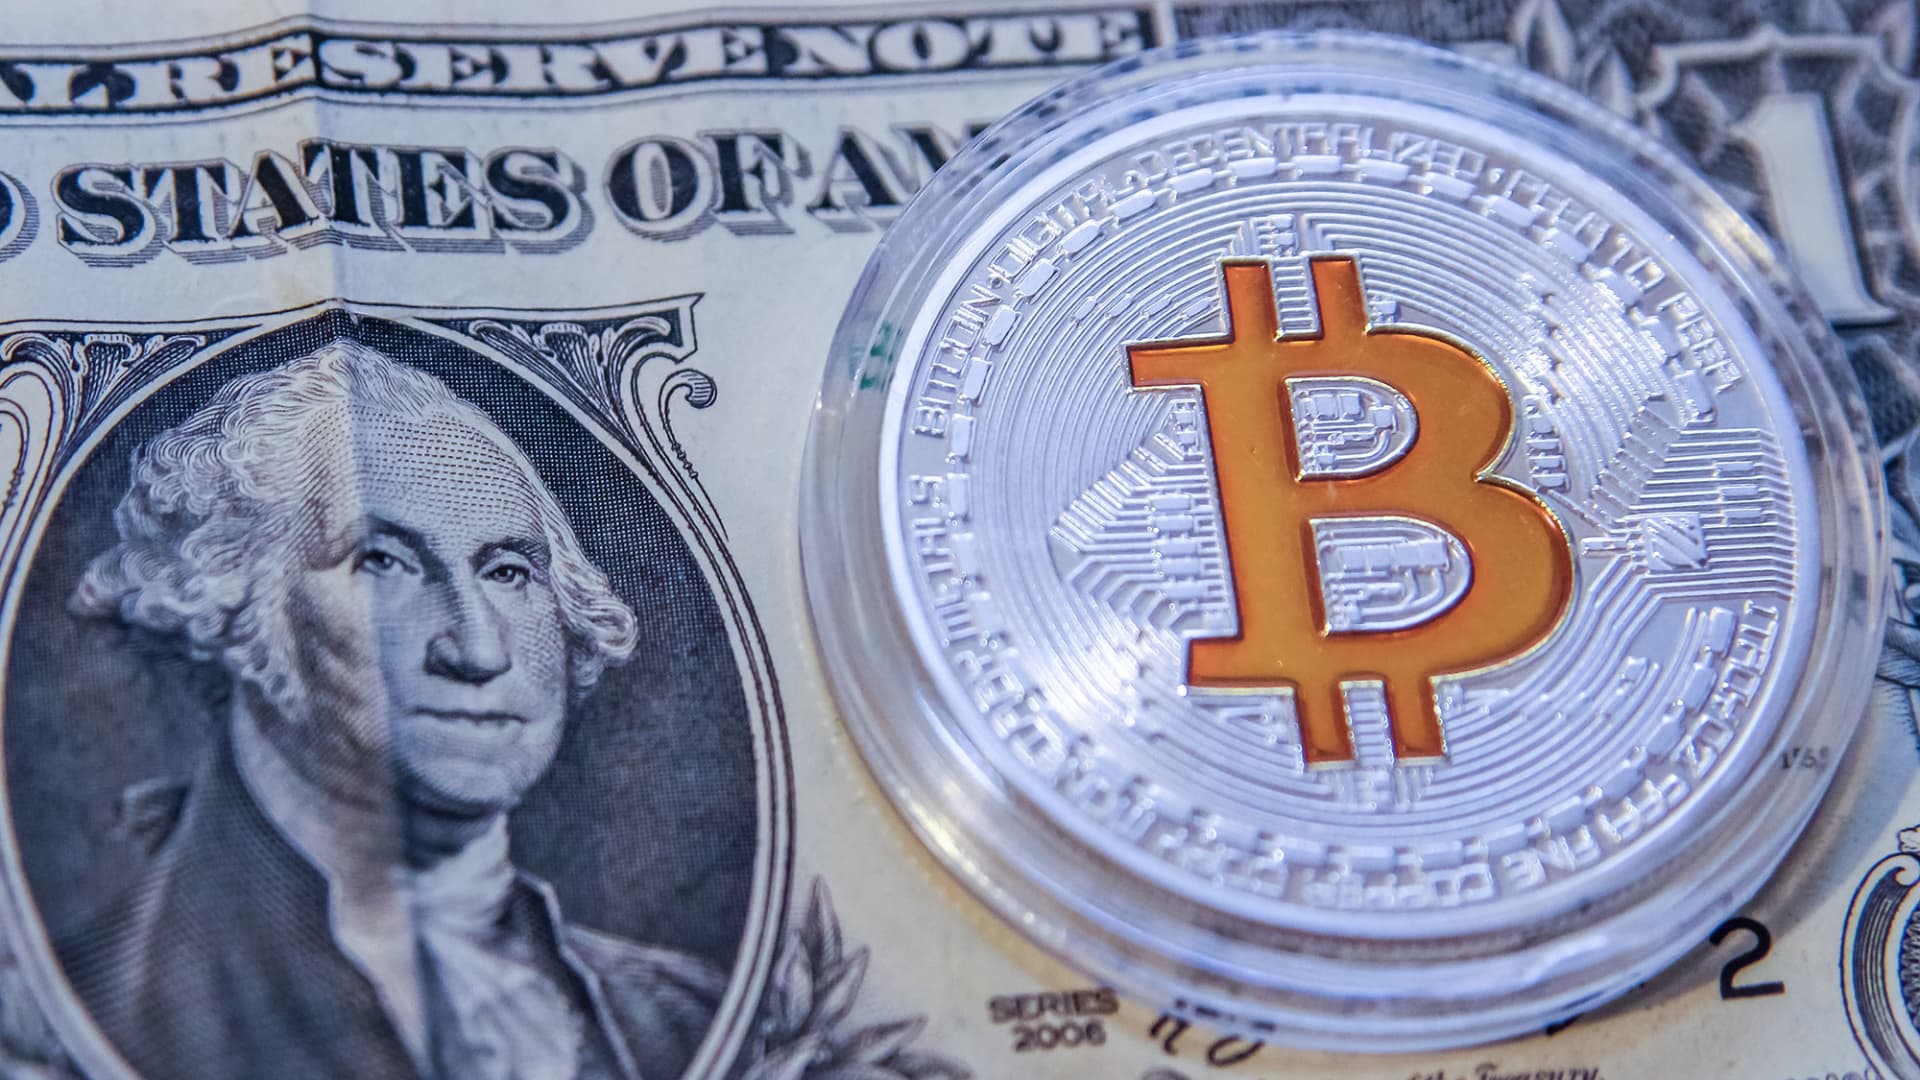 IBM is experimenting with a cryptocurrency that’s pegged to the US dollar